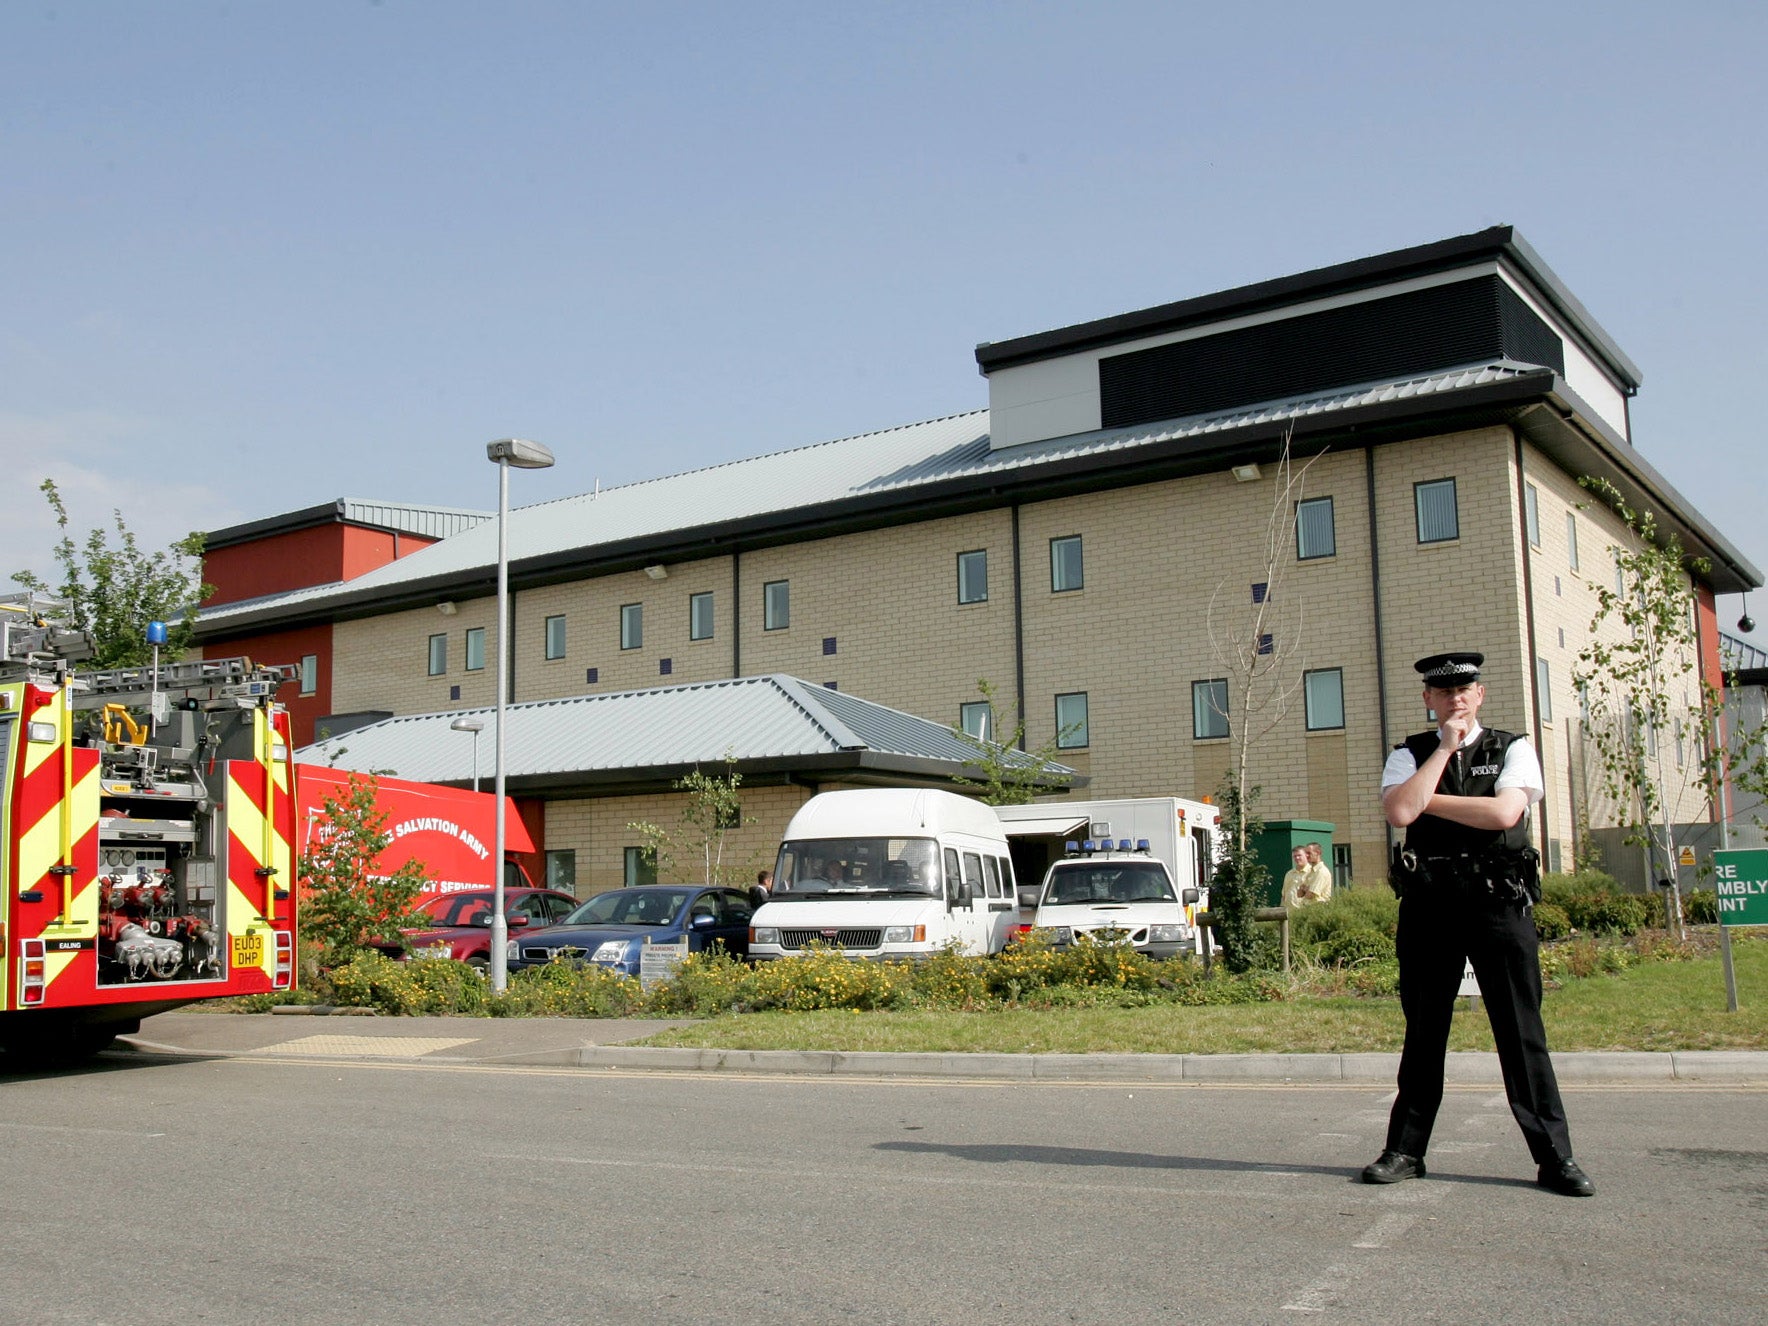 The Harmondsworth Immigration Detention centre was found to be overcrowded